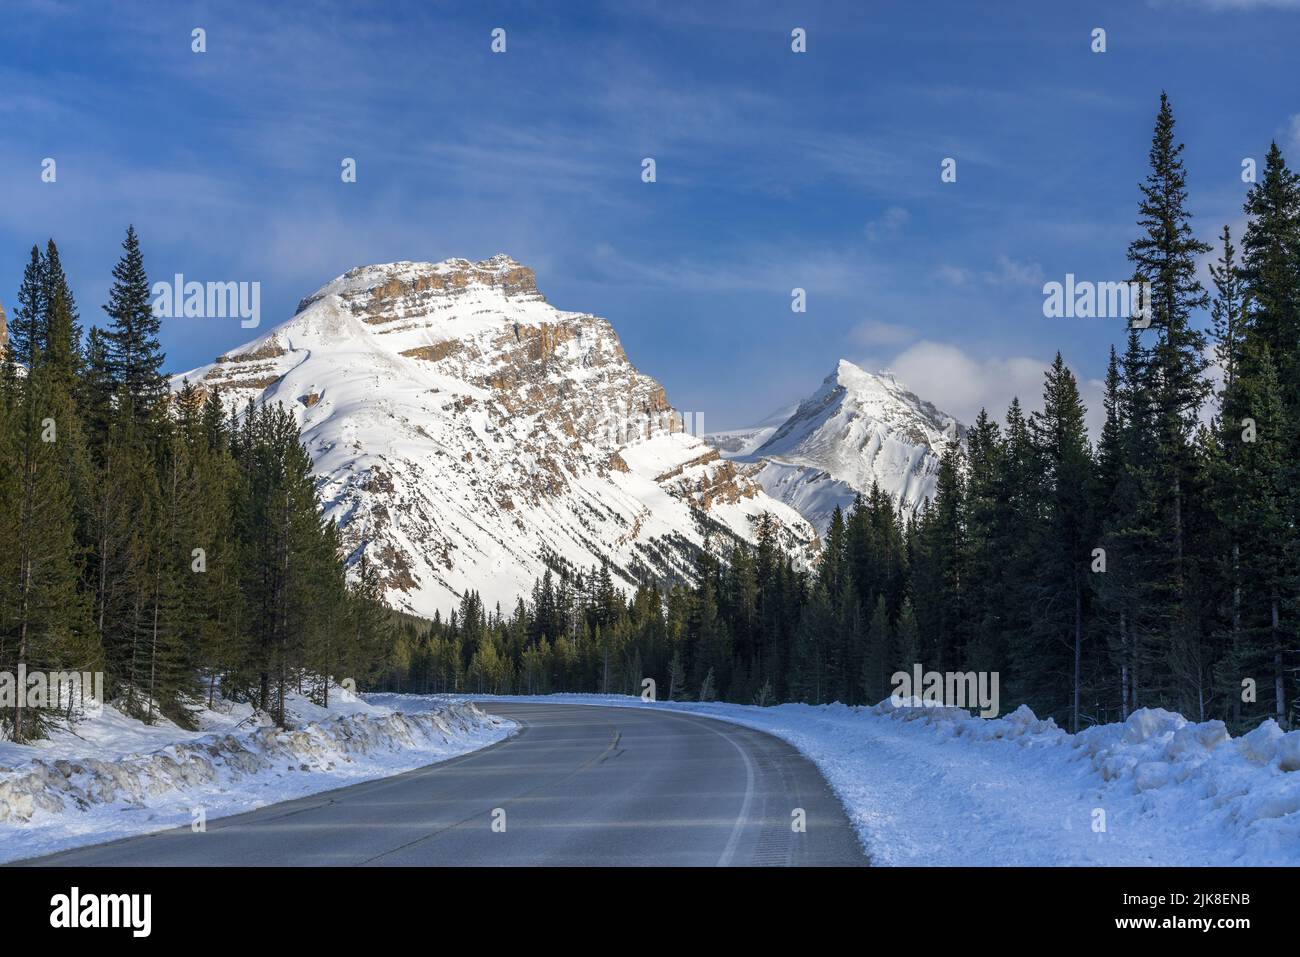 A scenic mountain view along the Icefields Parkway, Banff National Park, Alberta, Canada. Stock Photo